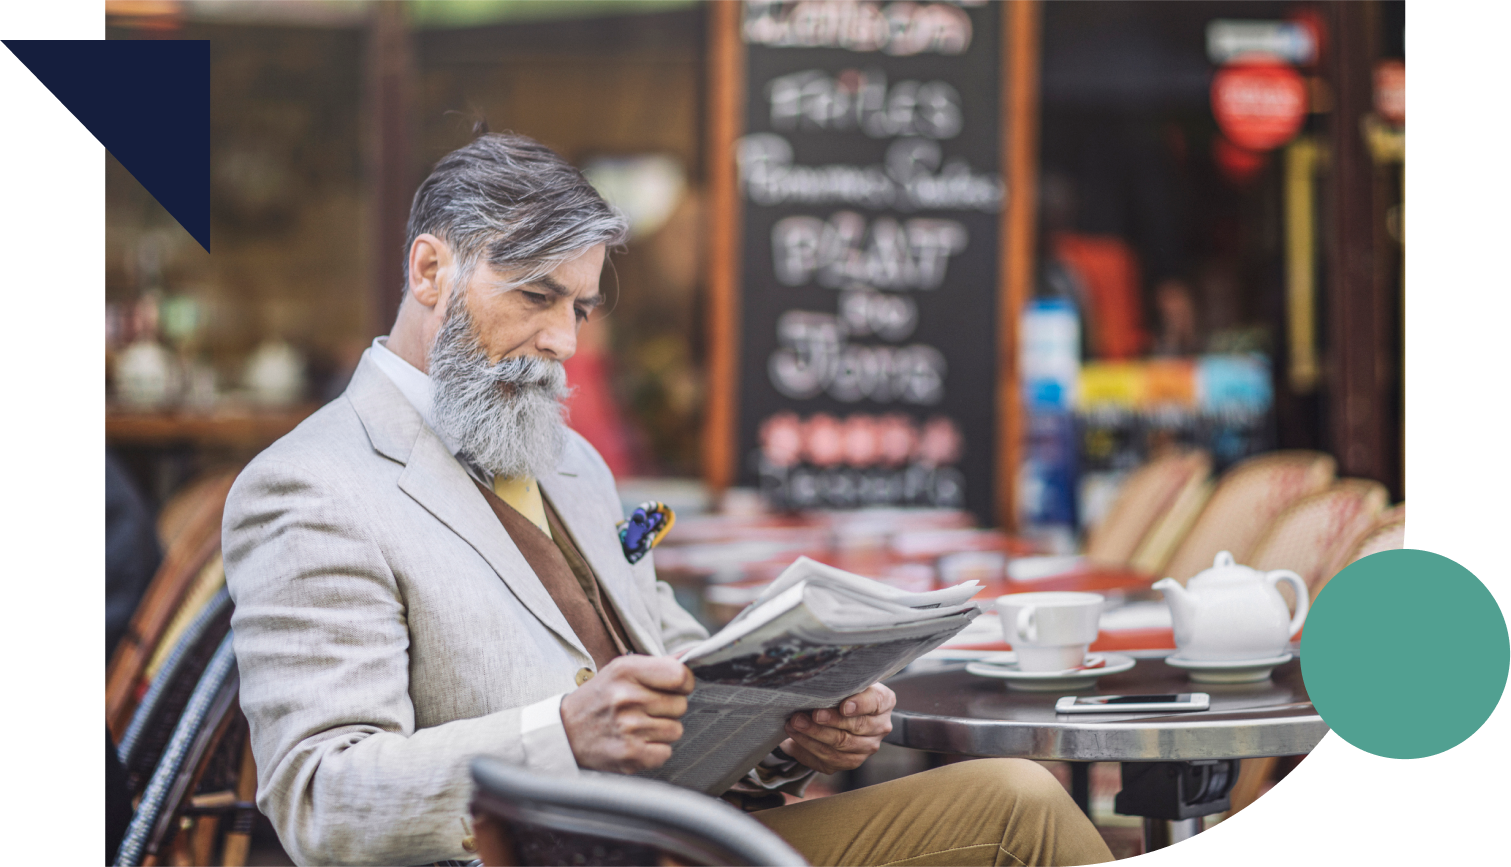 Well-dressed senior reading a newspaper at a cafe